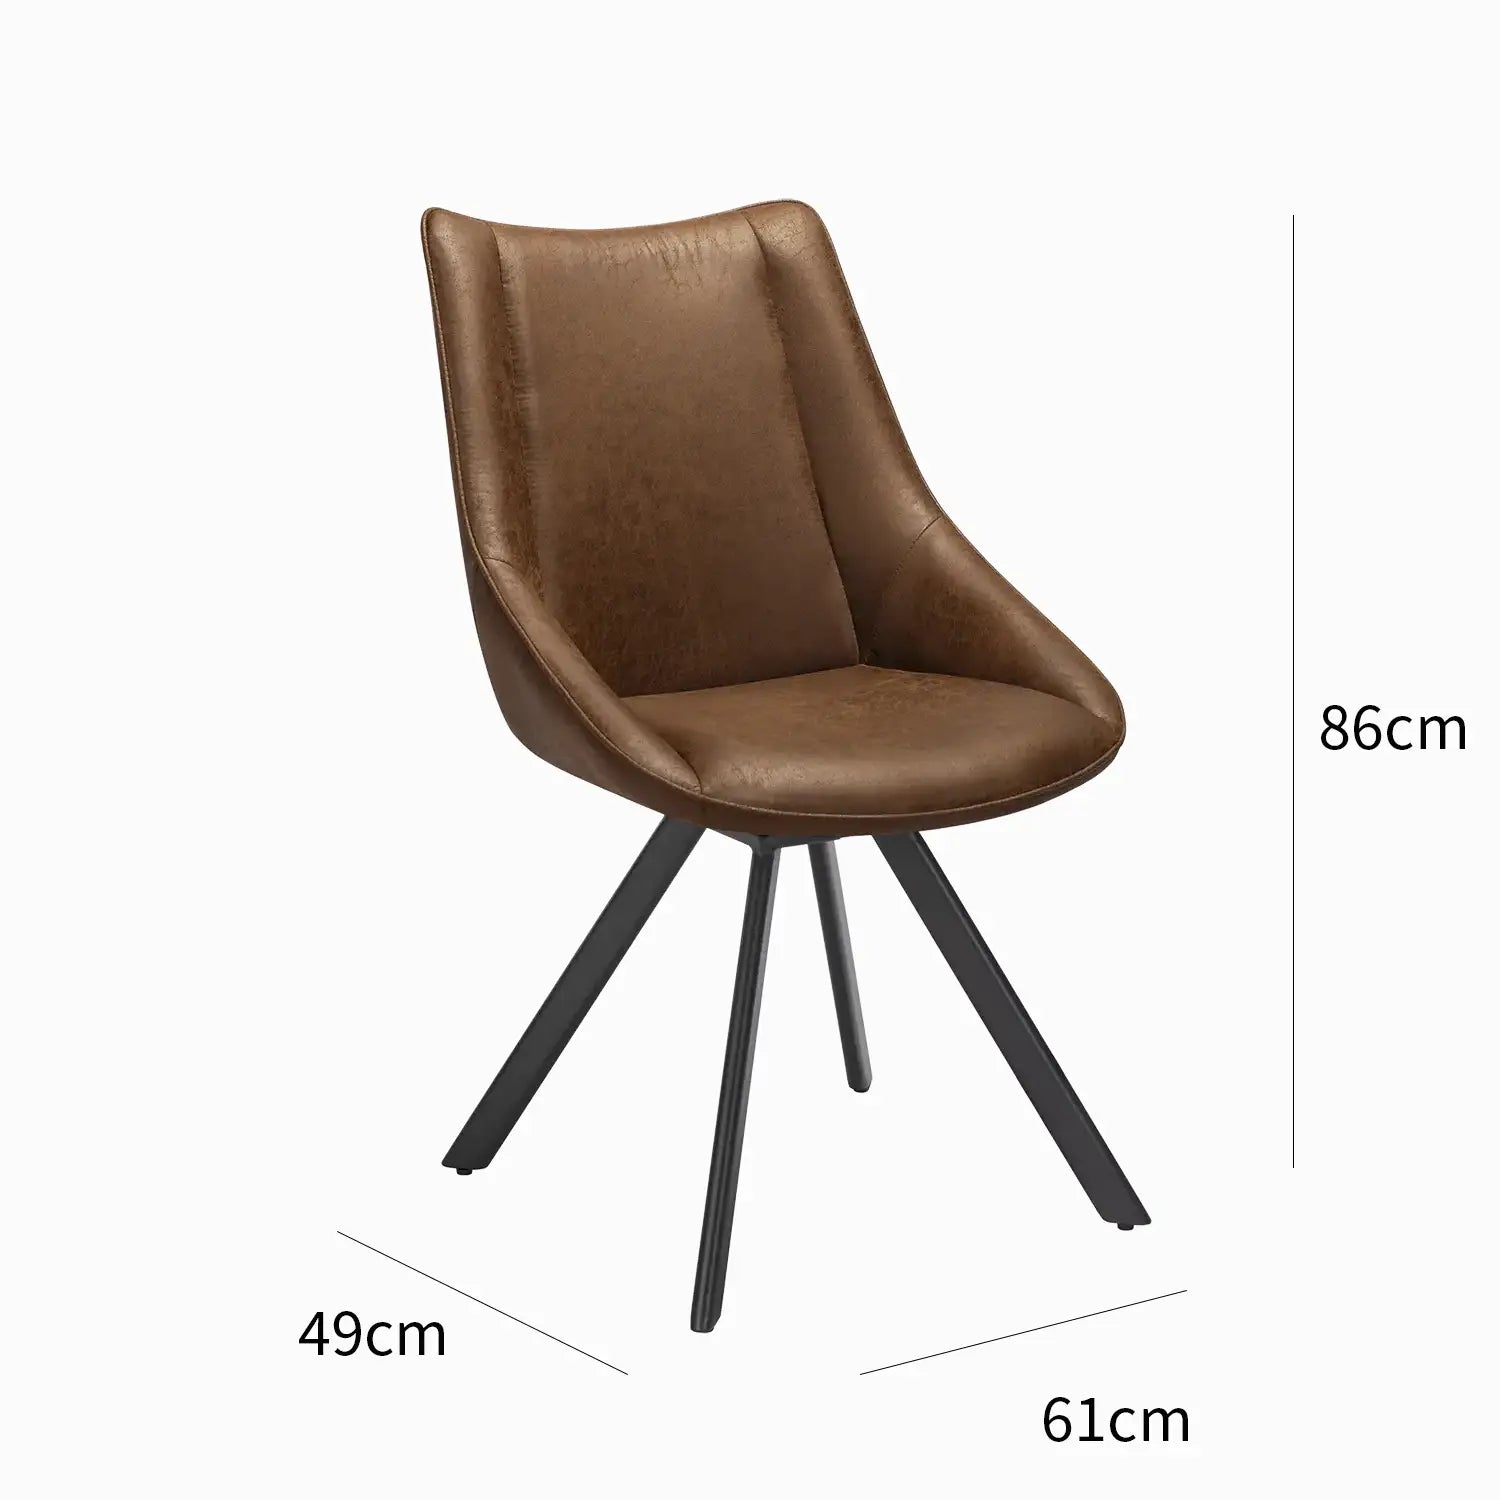 Lucio Tan Set of 4 Faux Leather Swivel Dining Chairs